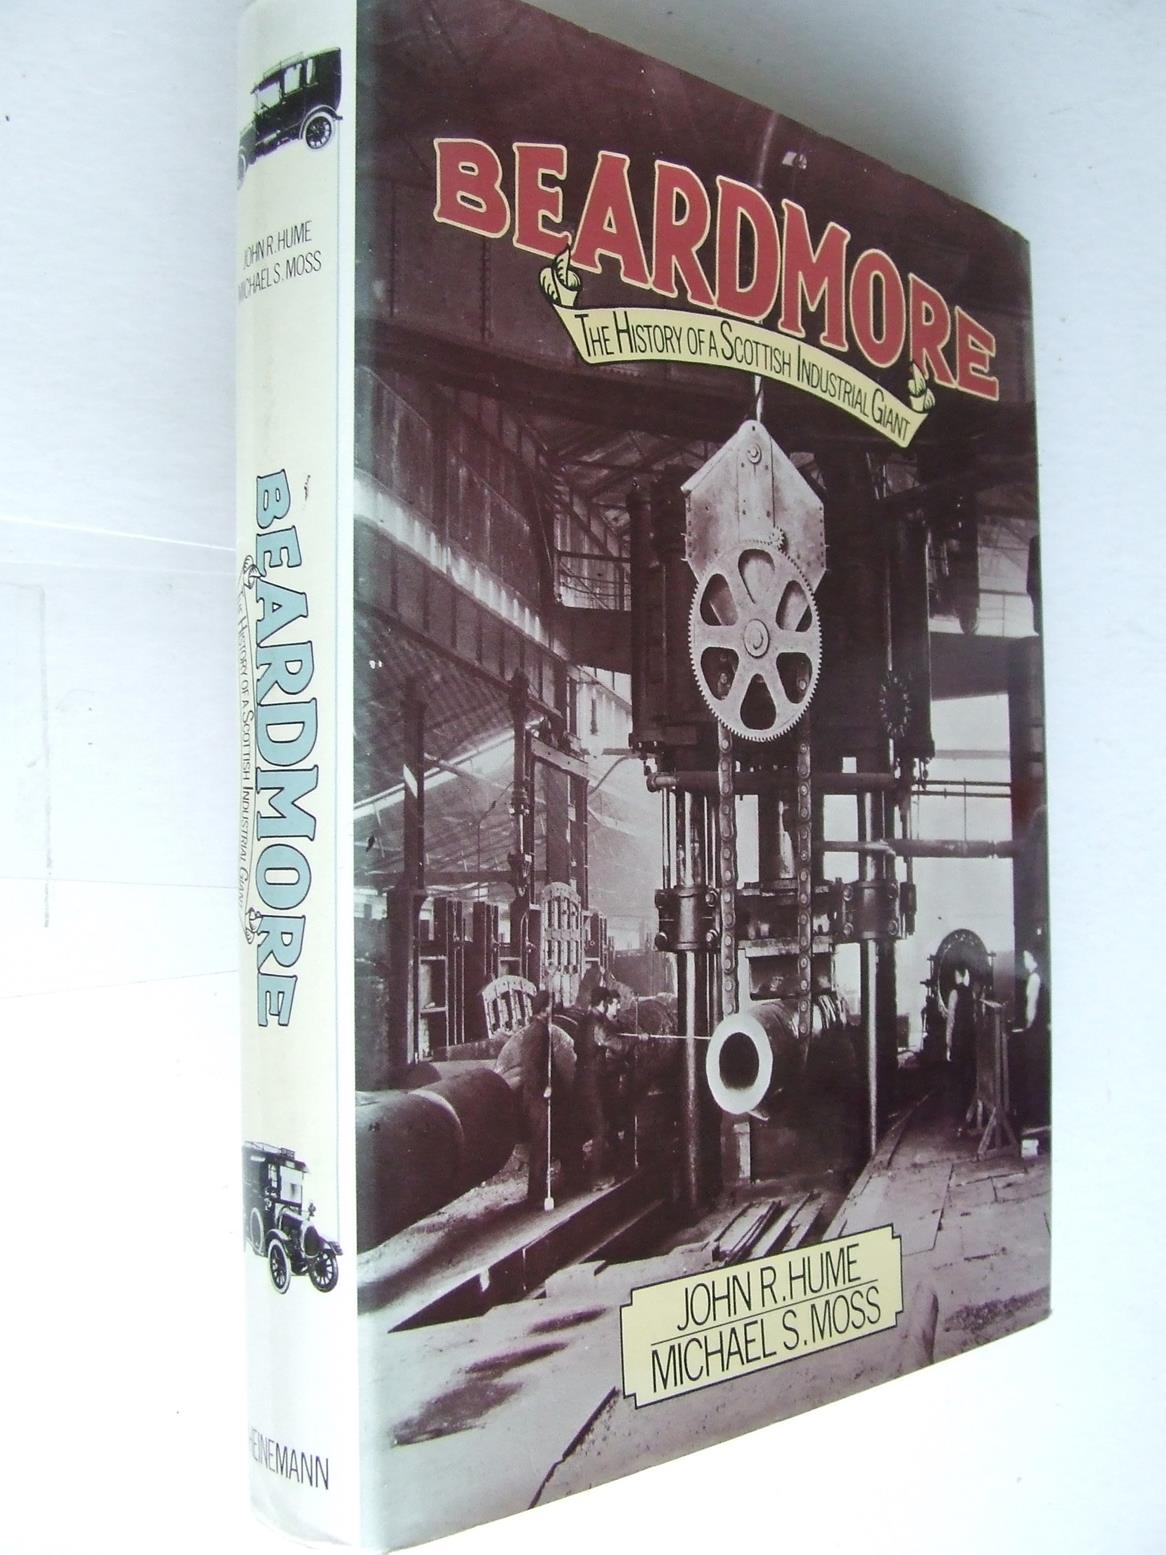 Beardmore,  the history of a Scottish industrial giant